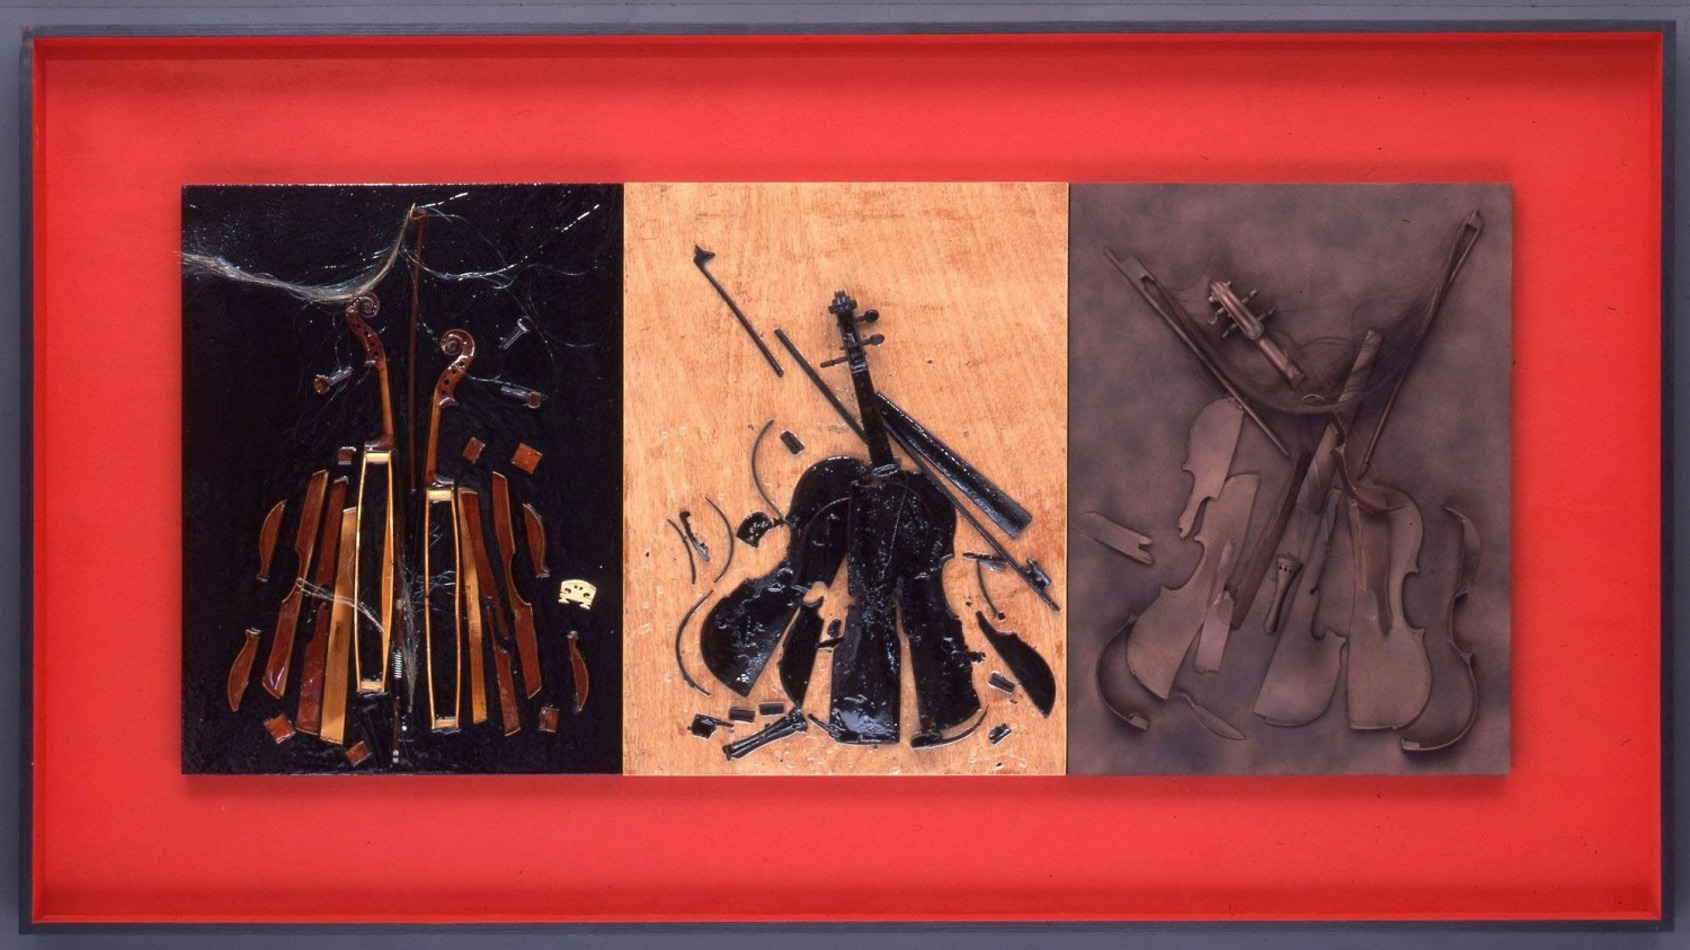 Colere sur Bois, Arman, 2001, 121x222x11cm. Violins sliced, broken and burnt on three wooden panels in a frame, triptych. Courtesy of The Arman Marital Trust. 